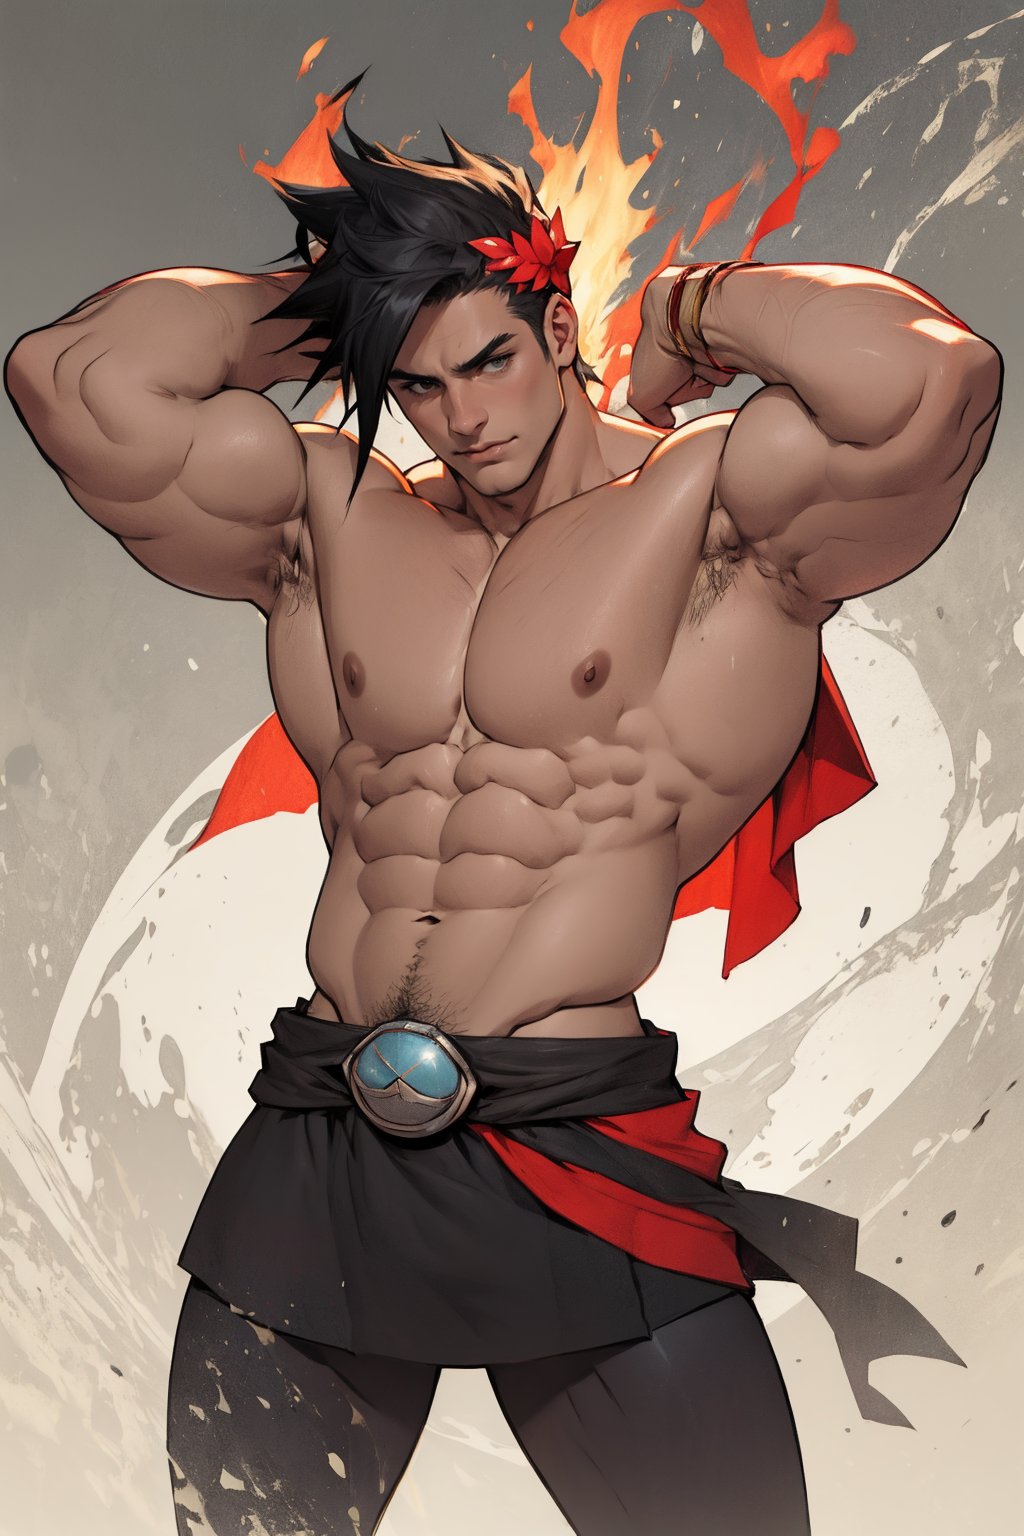 Zagreus with large muscular body shape